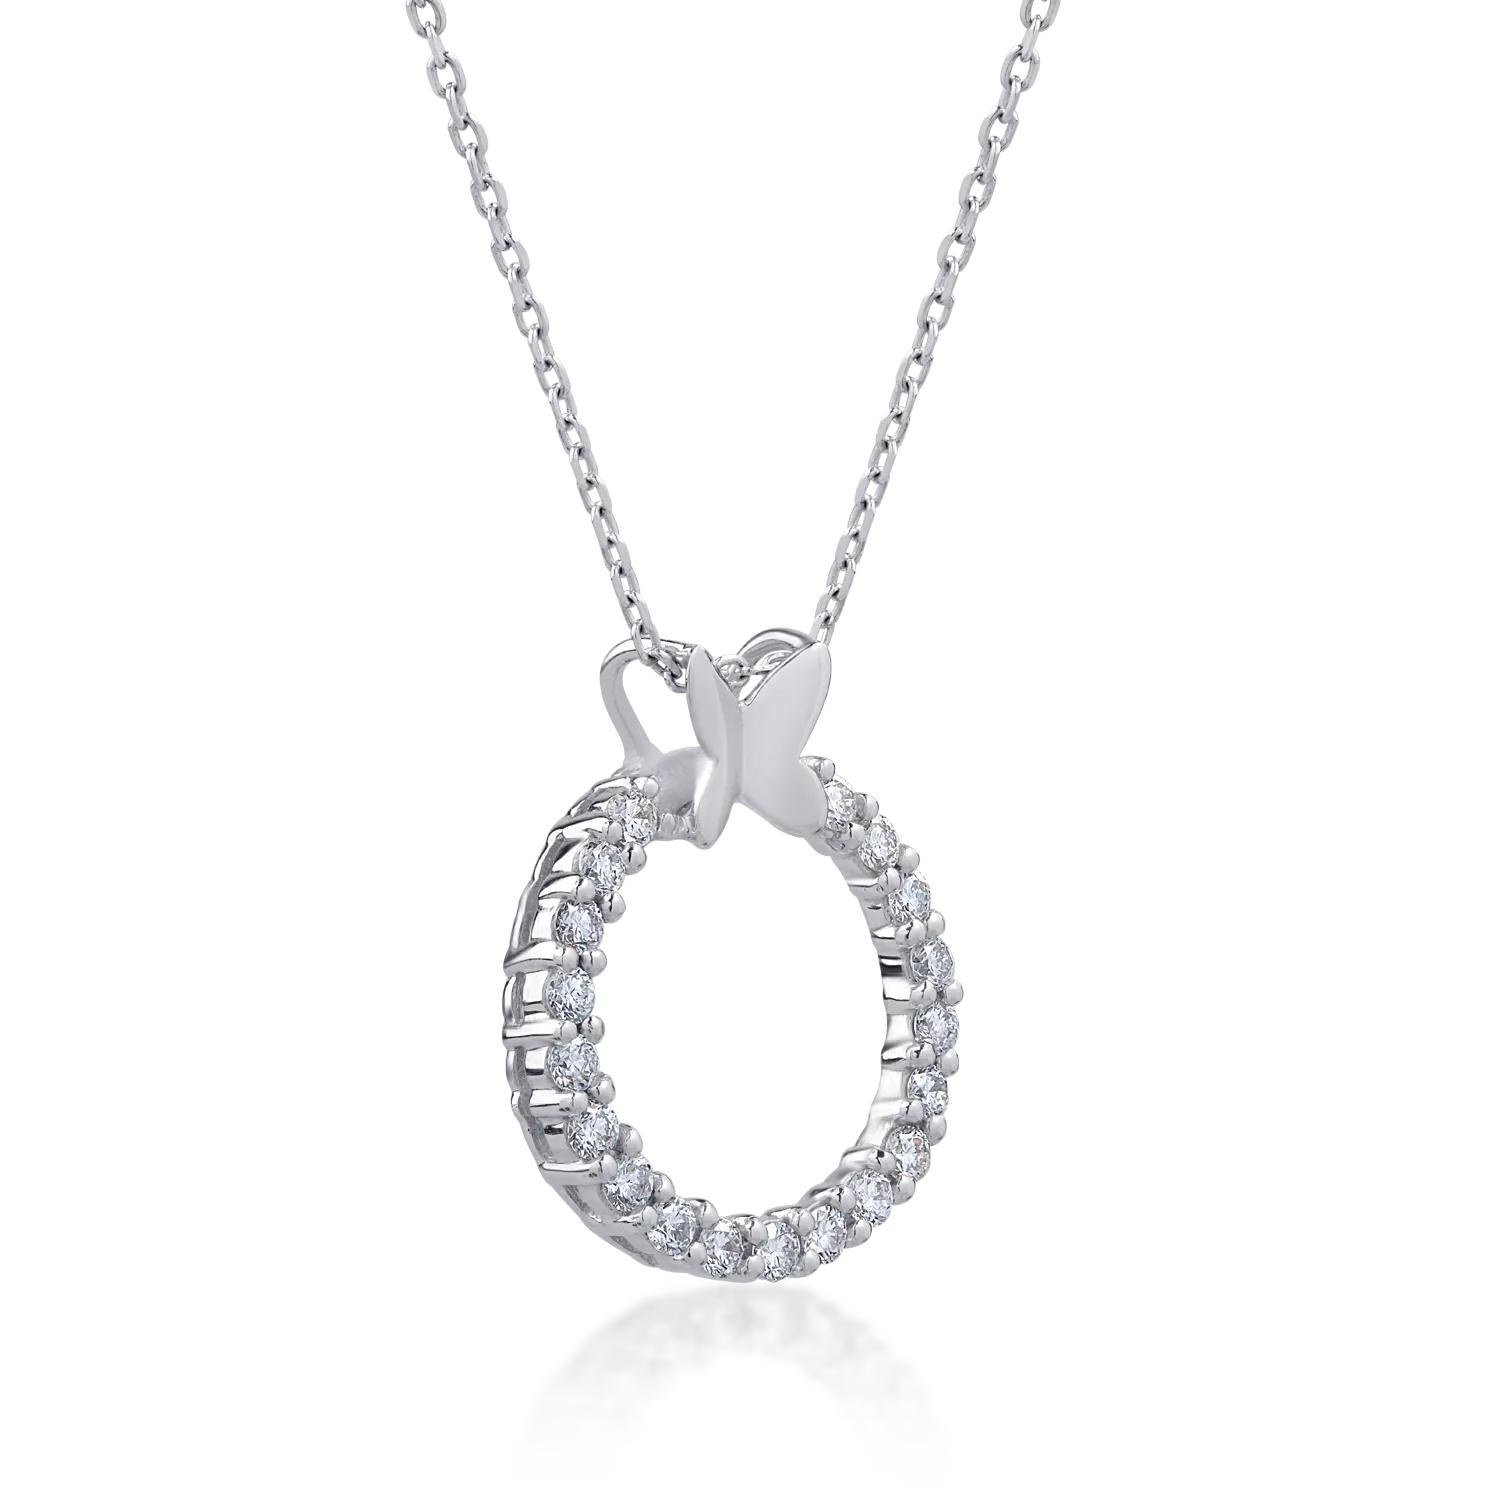 14K white gold pendant necklace with 0.475ct diamonds